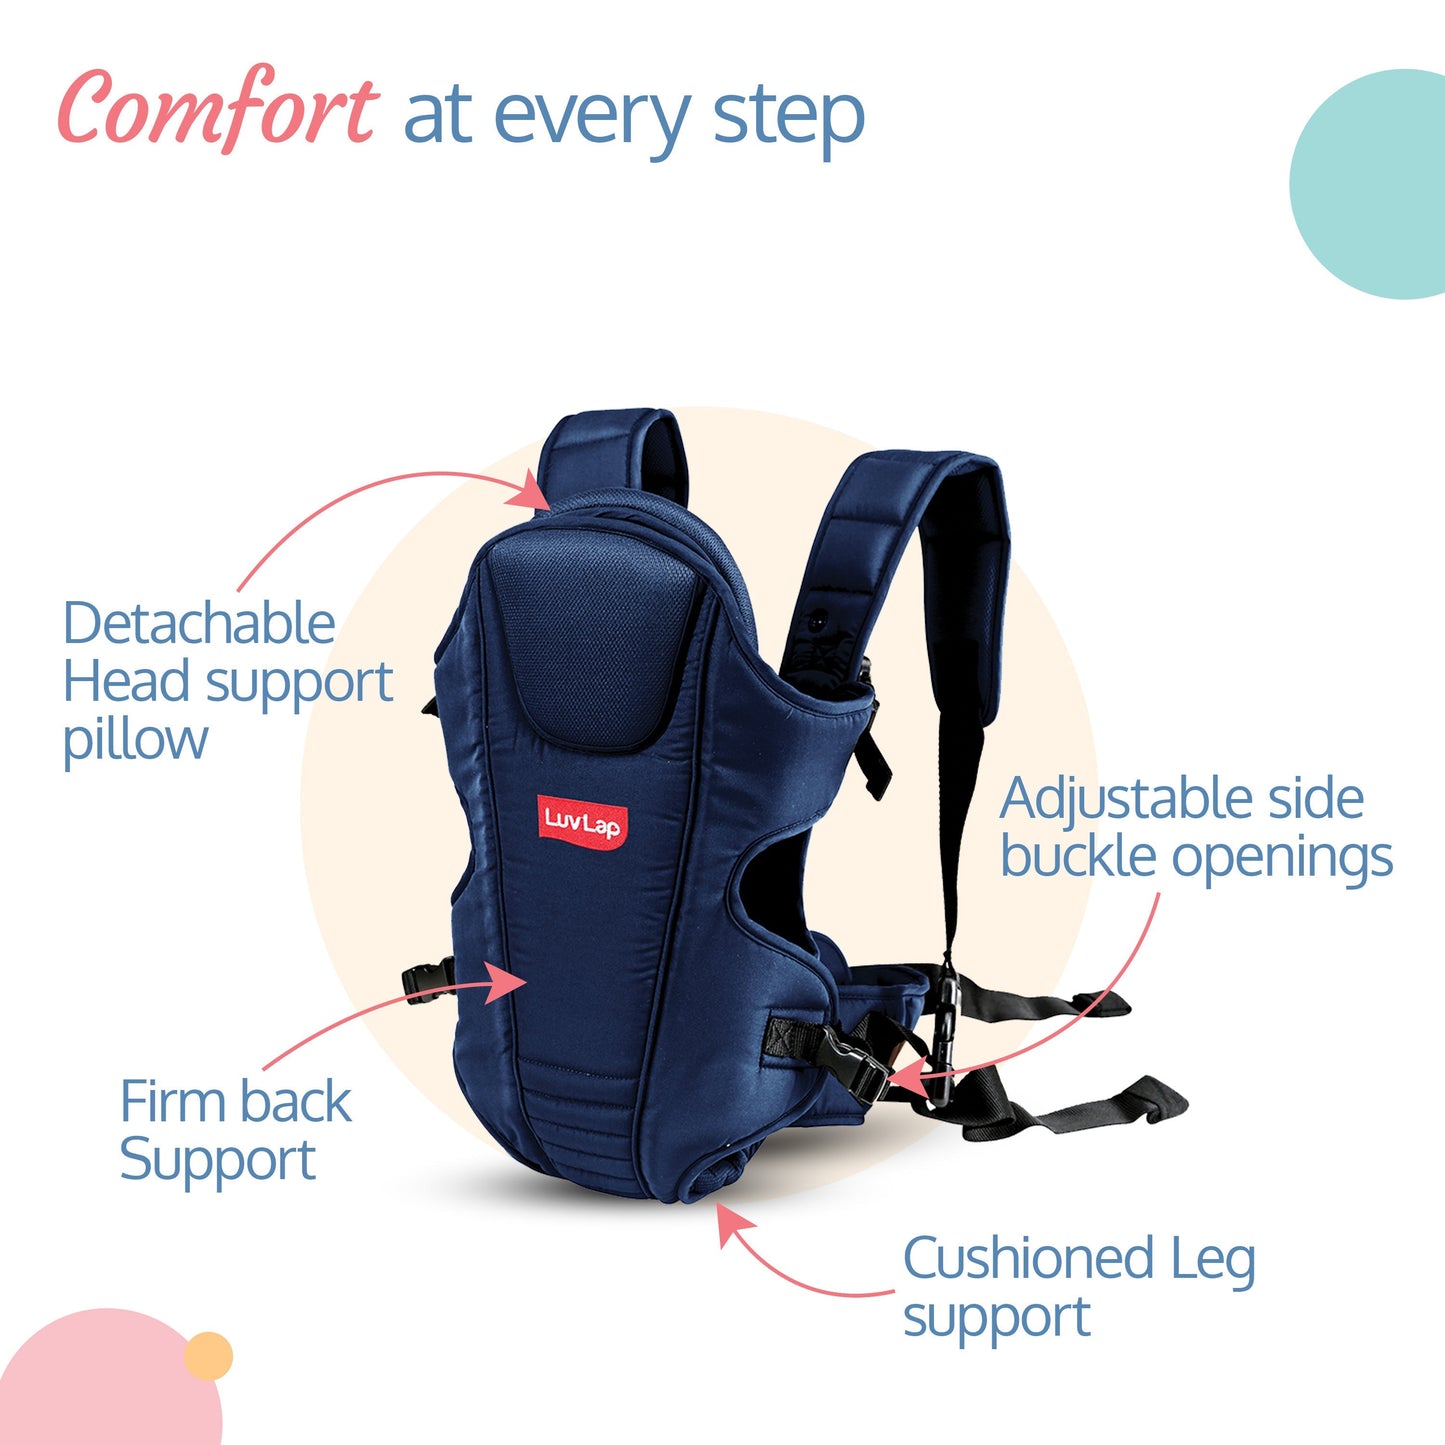 Galaxy Baby Carrier, Blue